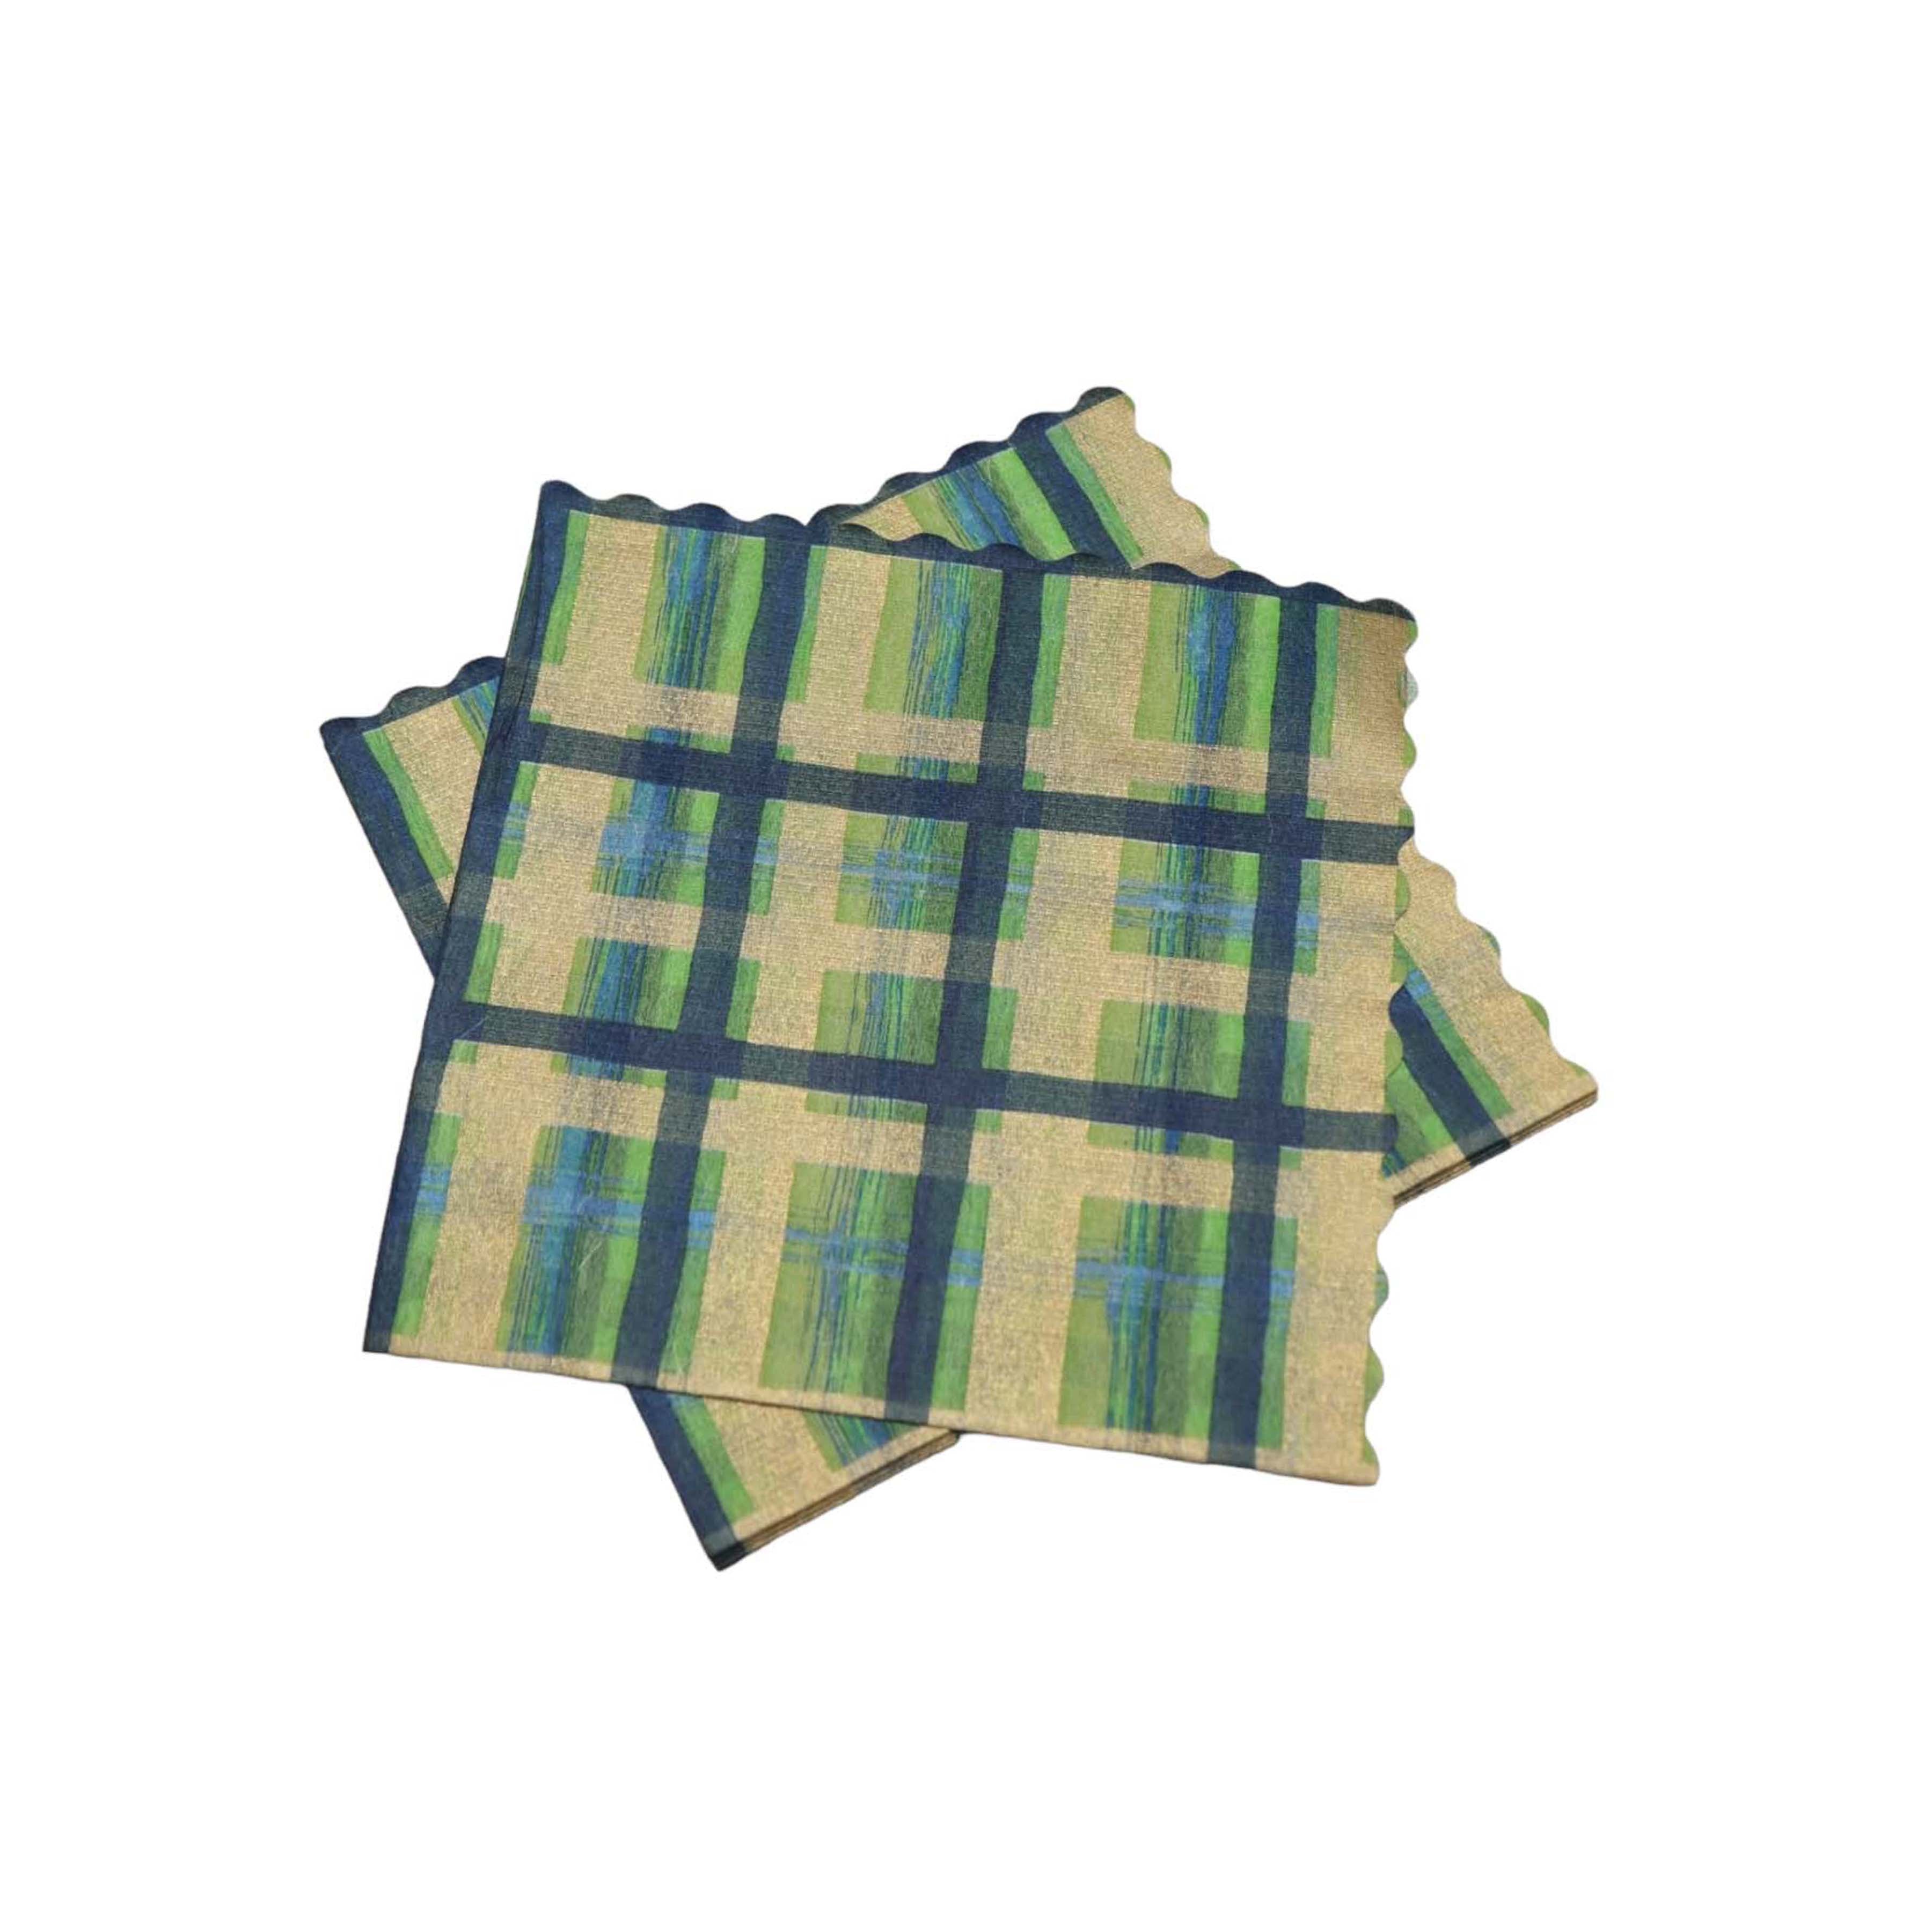 Luncheon Dinner Color Paper Serviettes 2ply 20pack